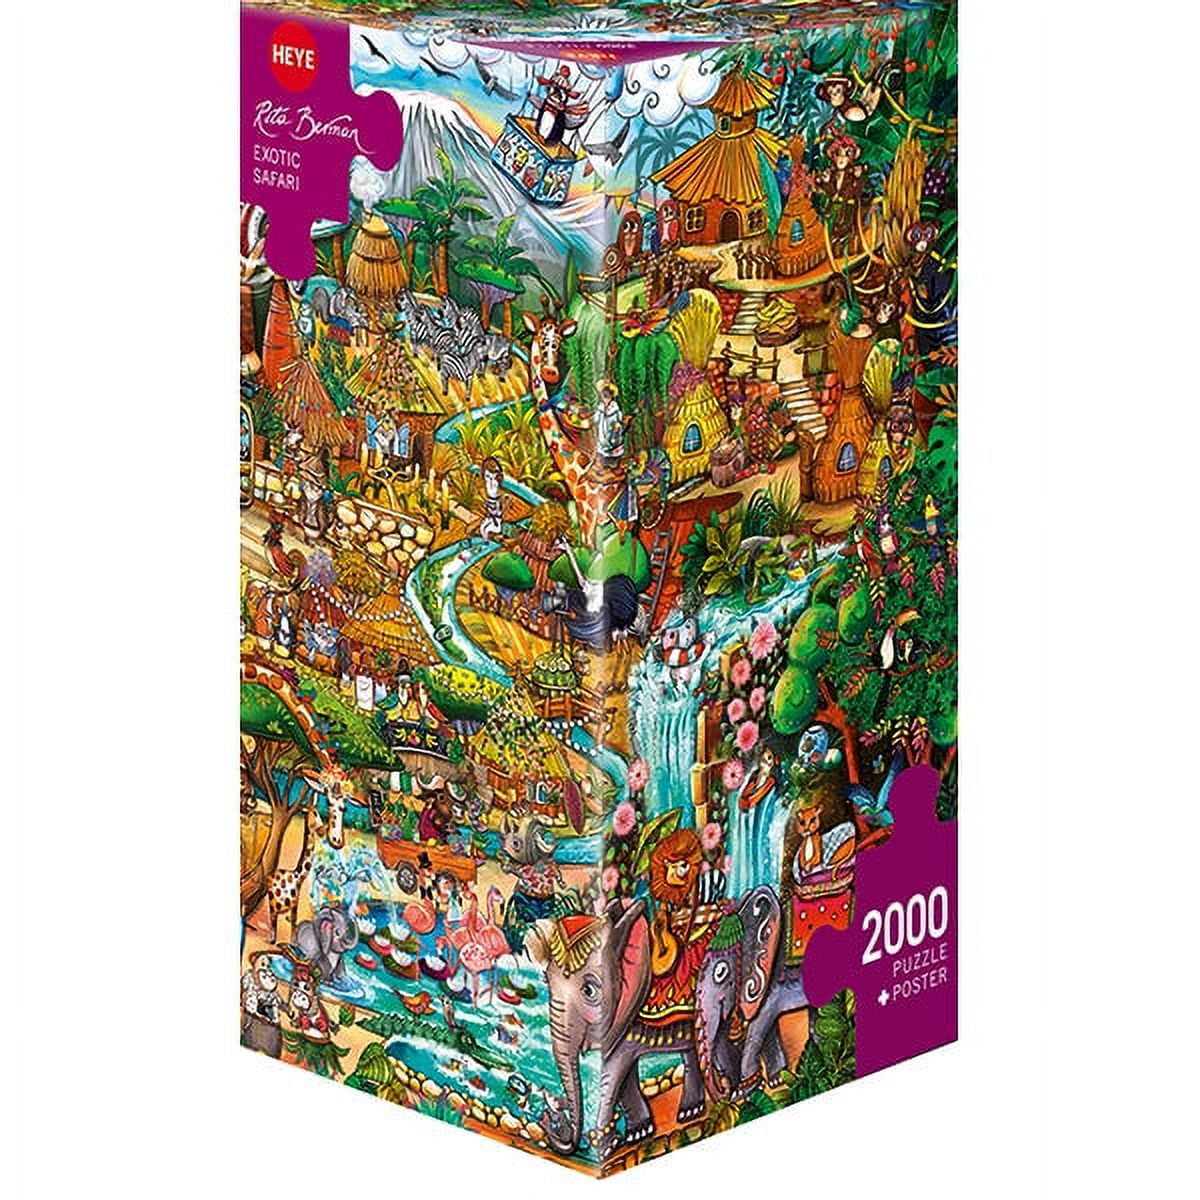 New Large Puzzle 2000 Pieces 3000 1500 Rainbow Sea World Animal Hard Paper  Jigsaw Game Puzzle for Teen Adult Friend Gift Trend